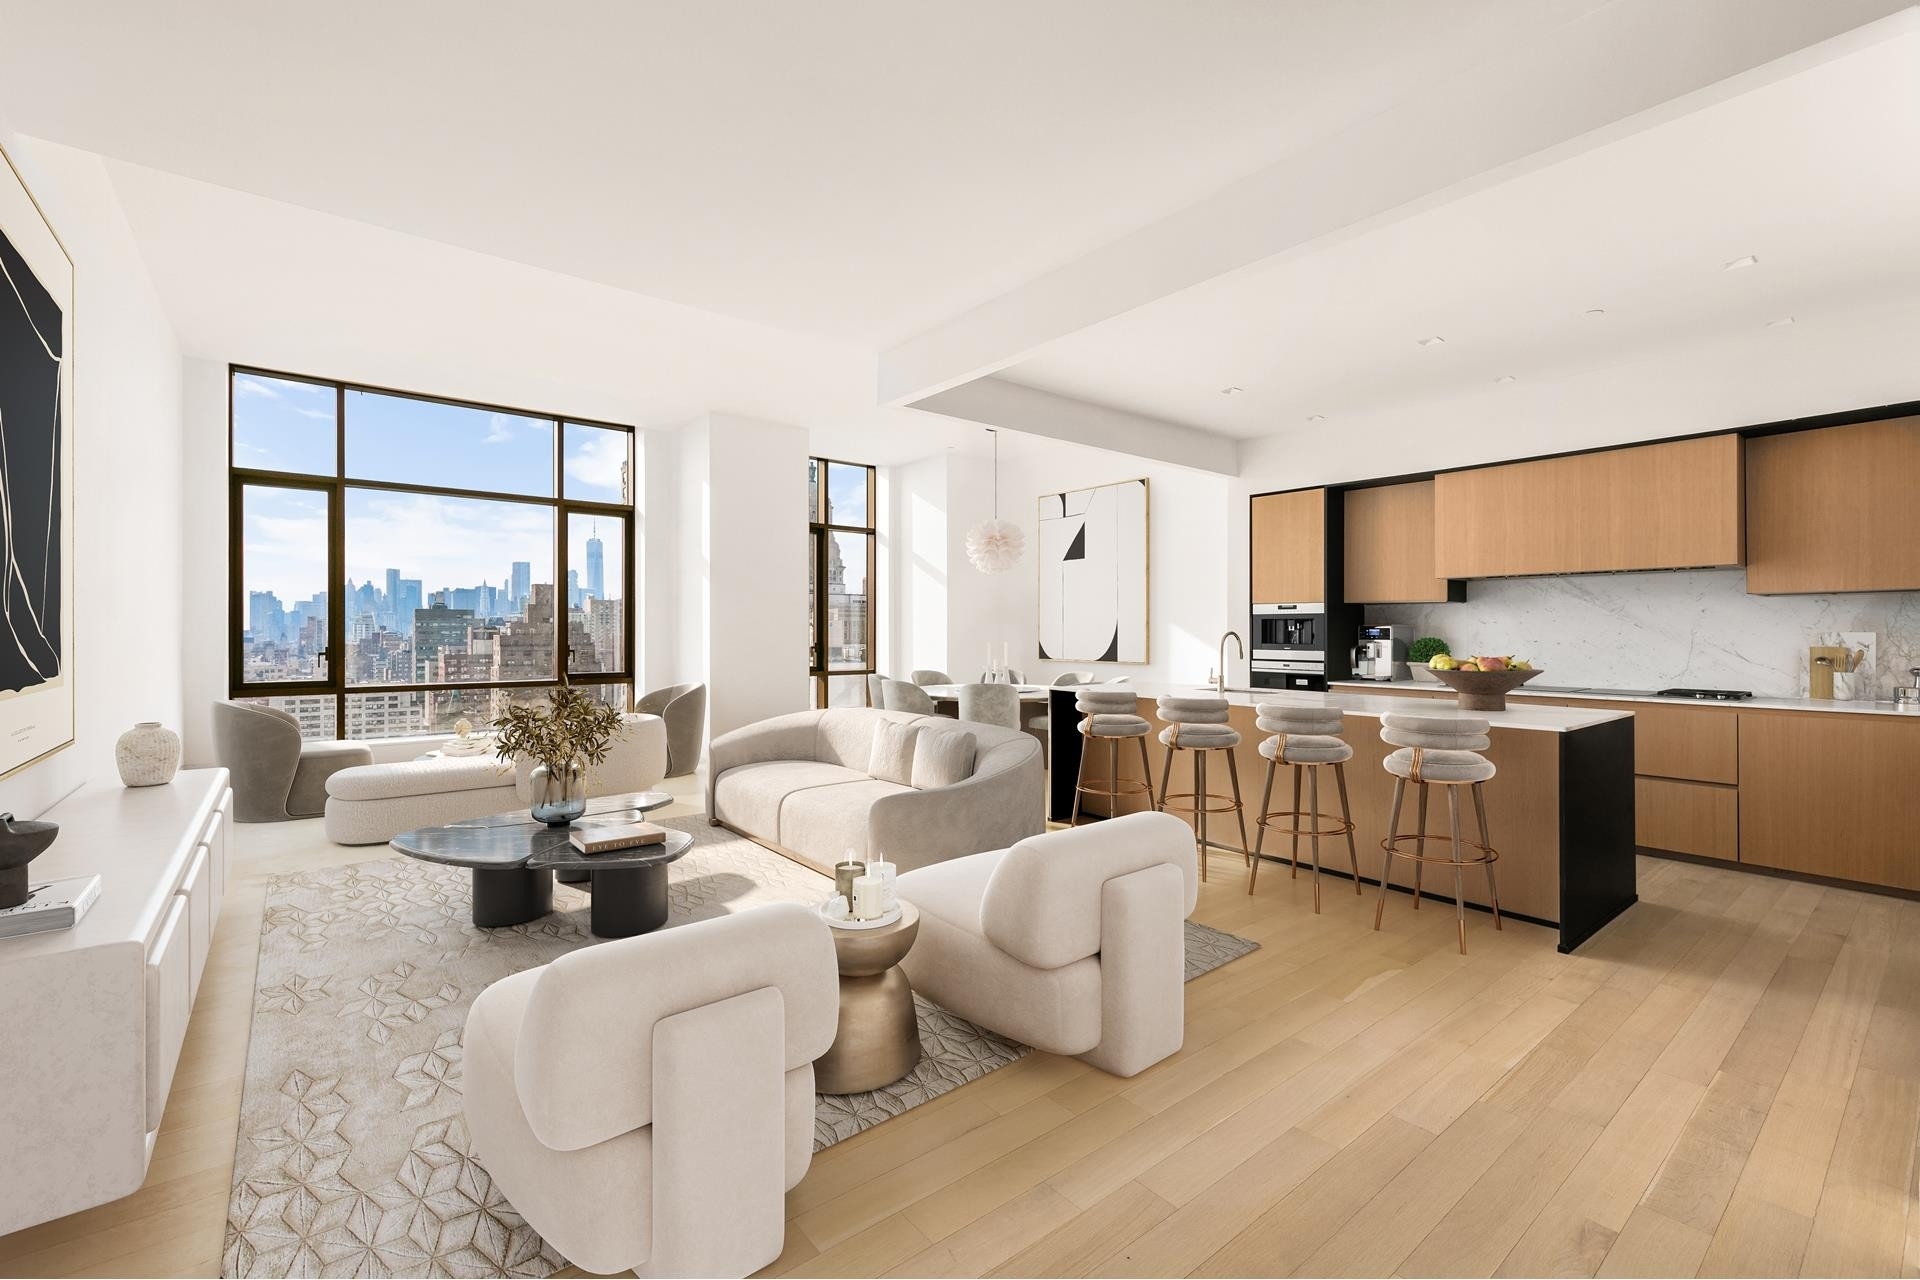 1. Condominiums for Sale at Gramercy Square, 215 E 19TH ST, 16A Gramercy Park, New York, New York 10003